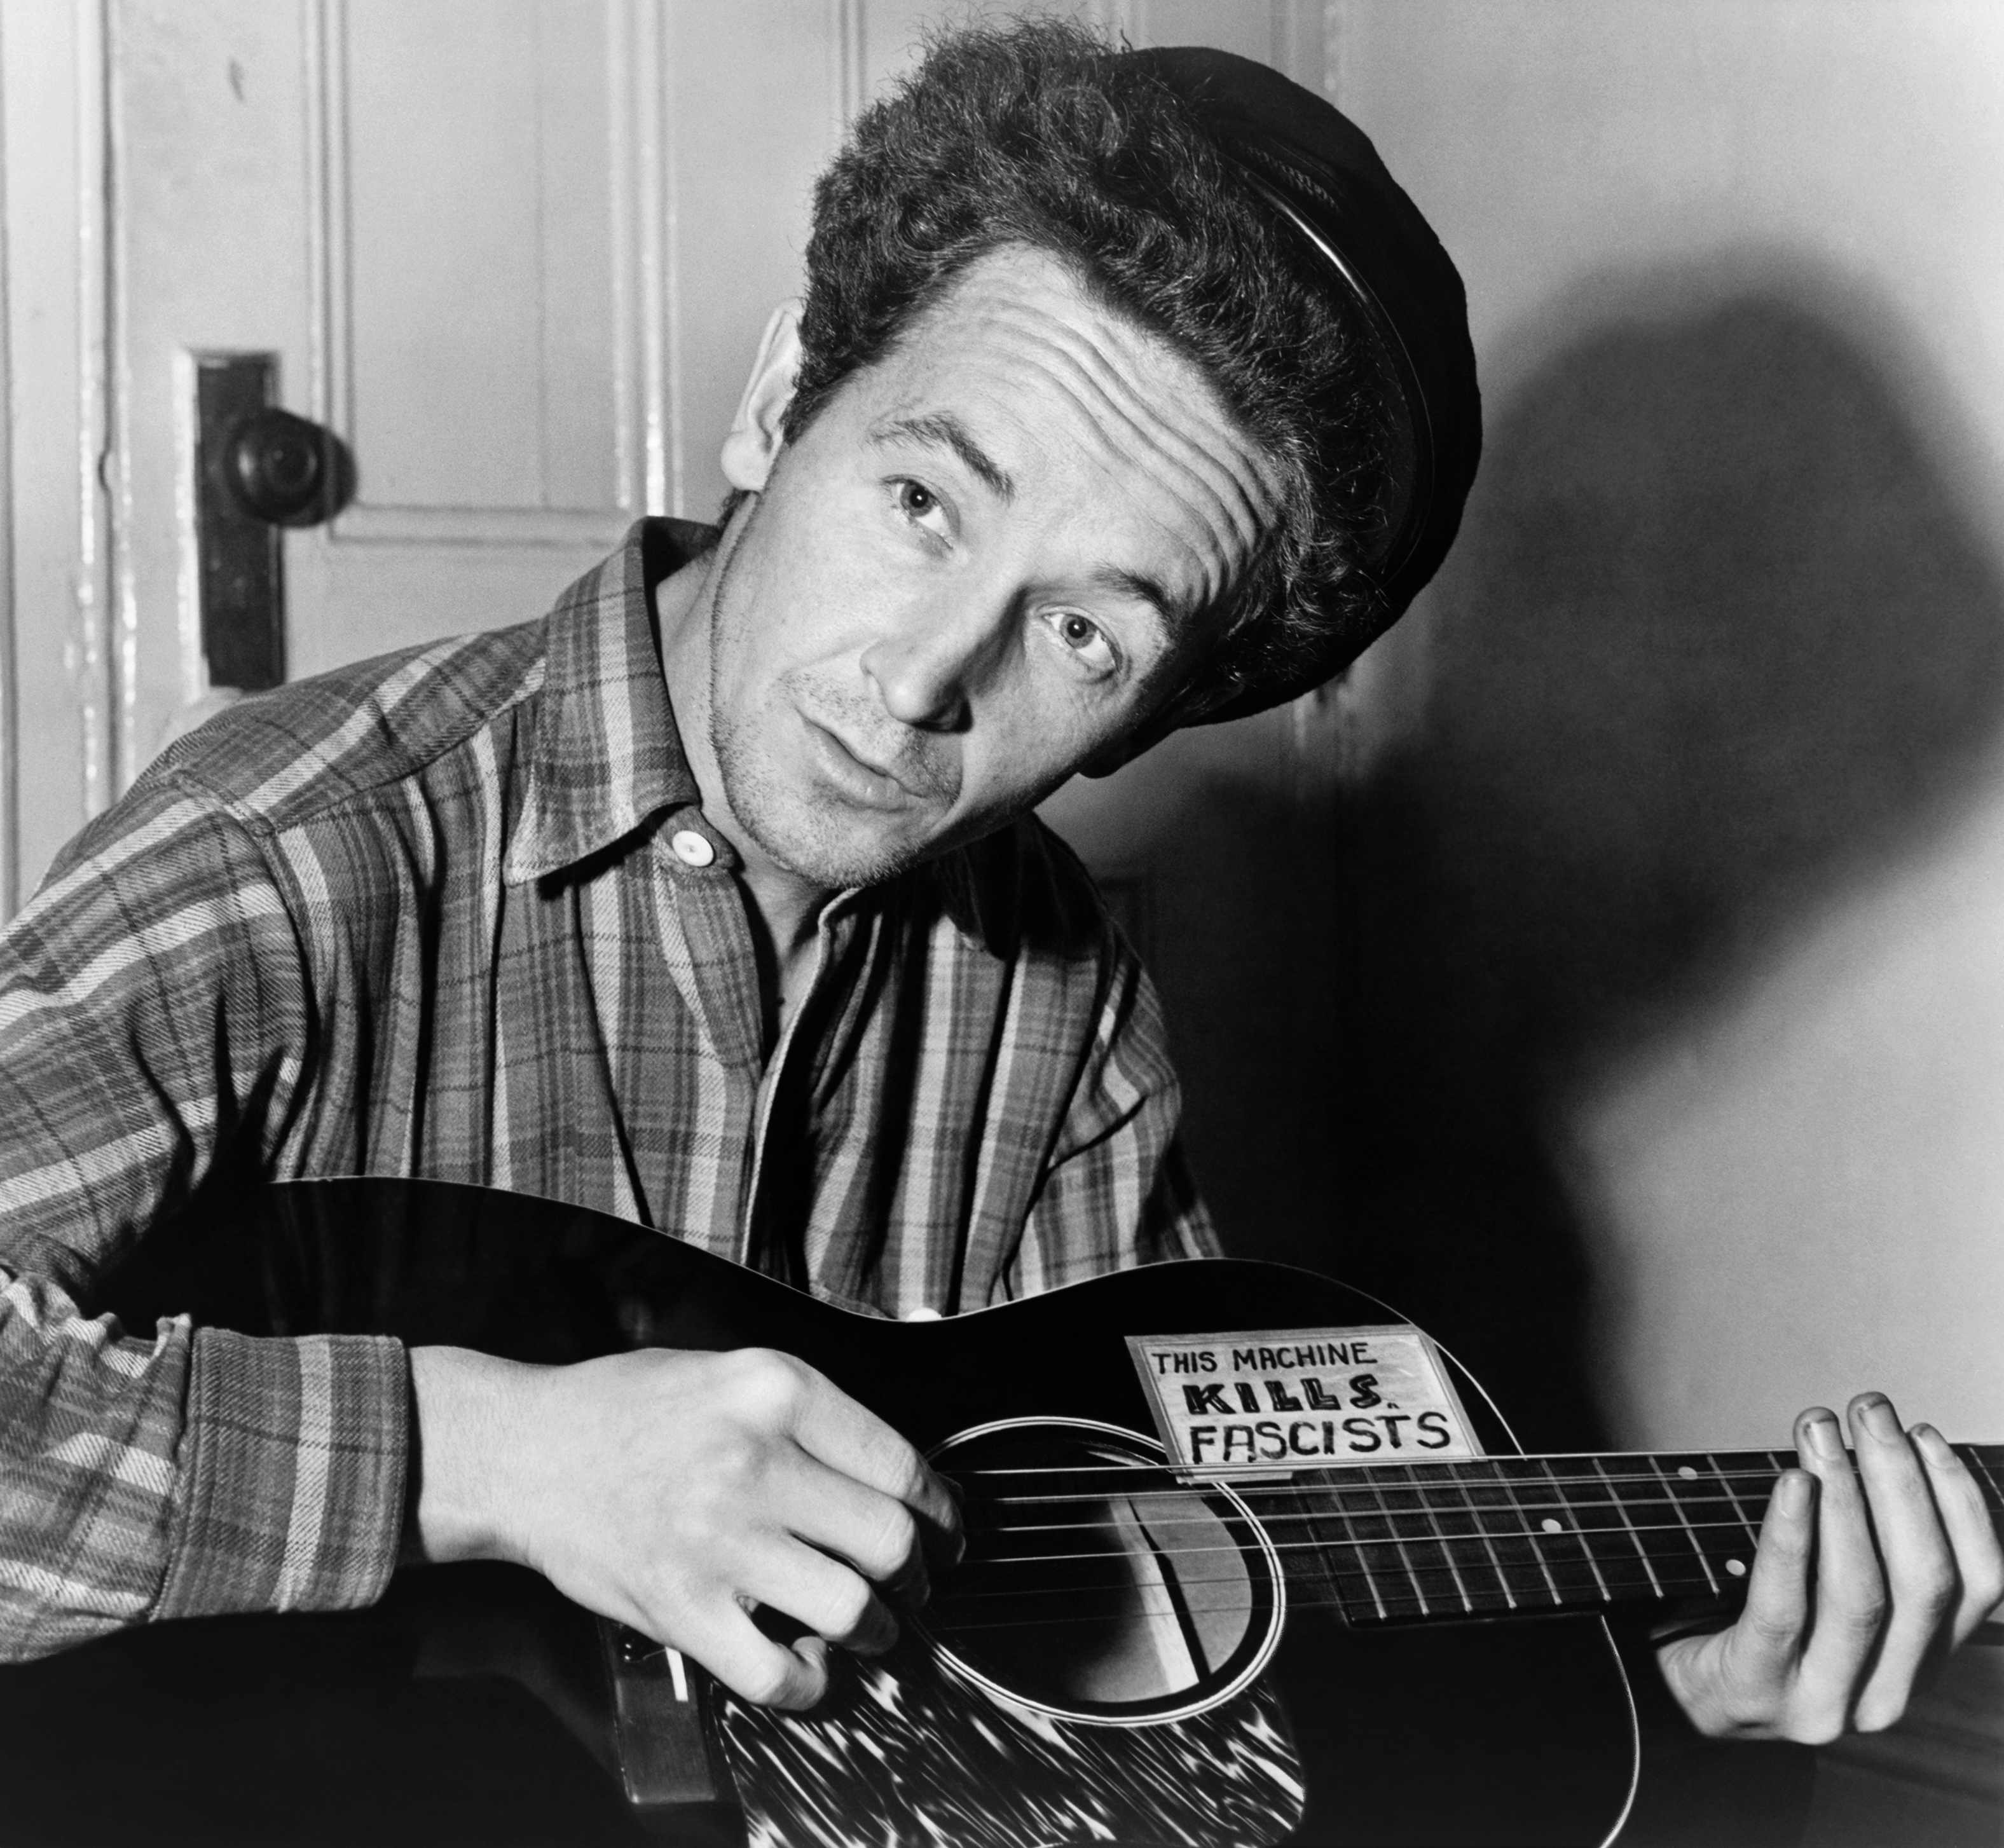 Woody Guthrie, March 1943. Library of Congress Prints and Photographs, cph.3c30859.